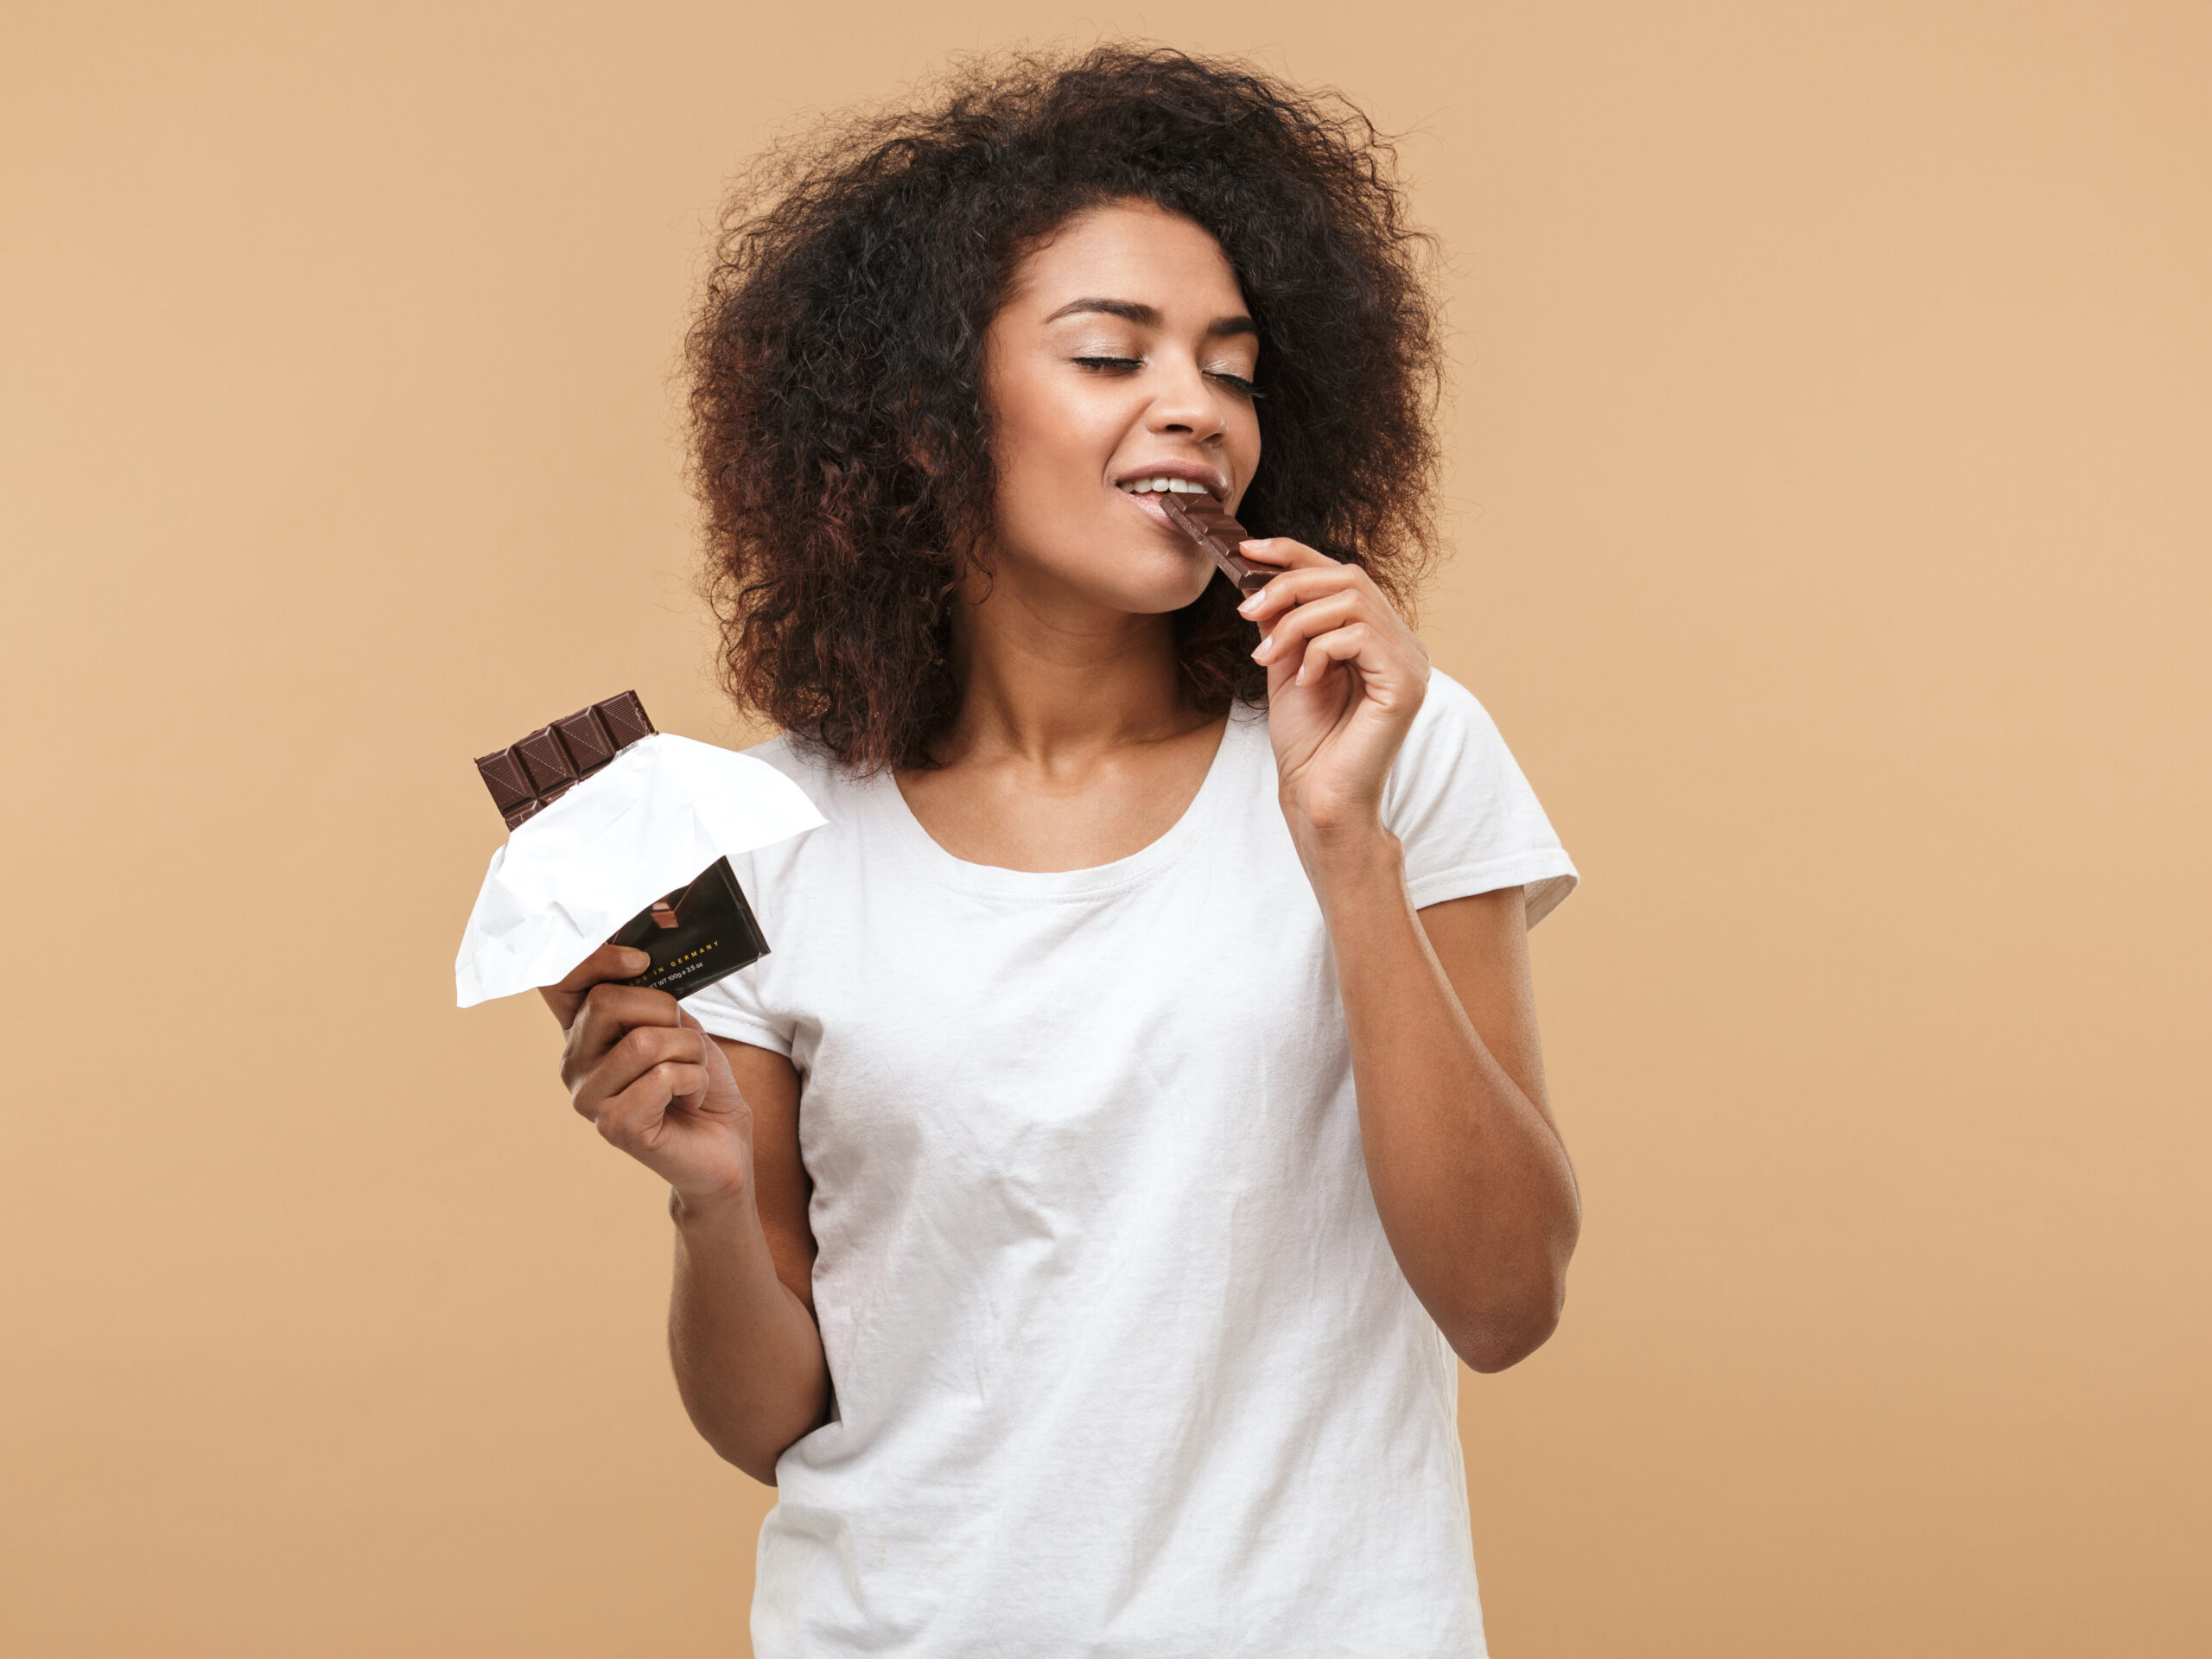 Portrait of a smiling young african woman eating chocolate bar isolated over beige background